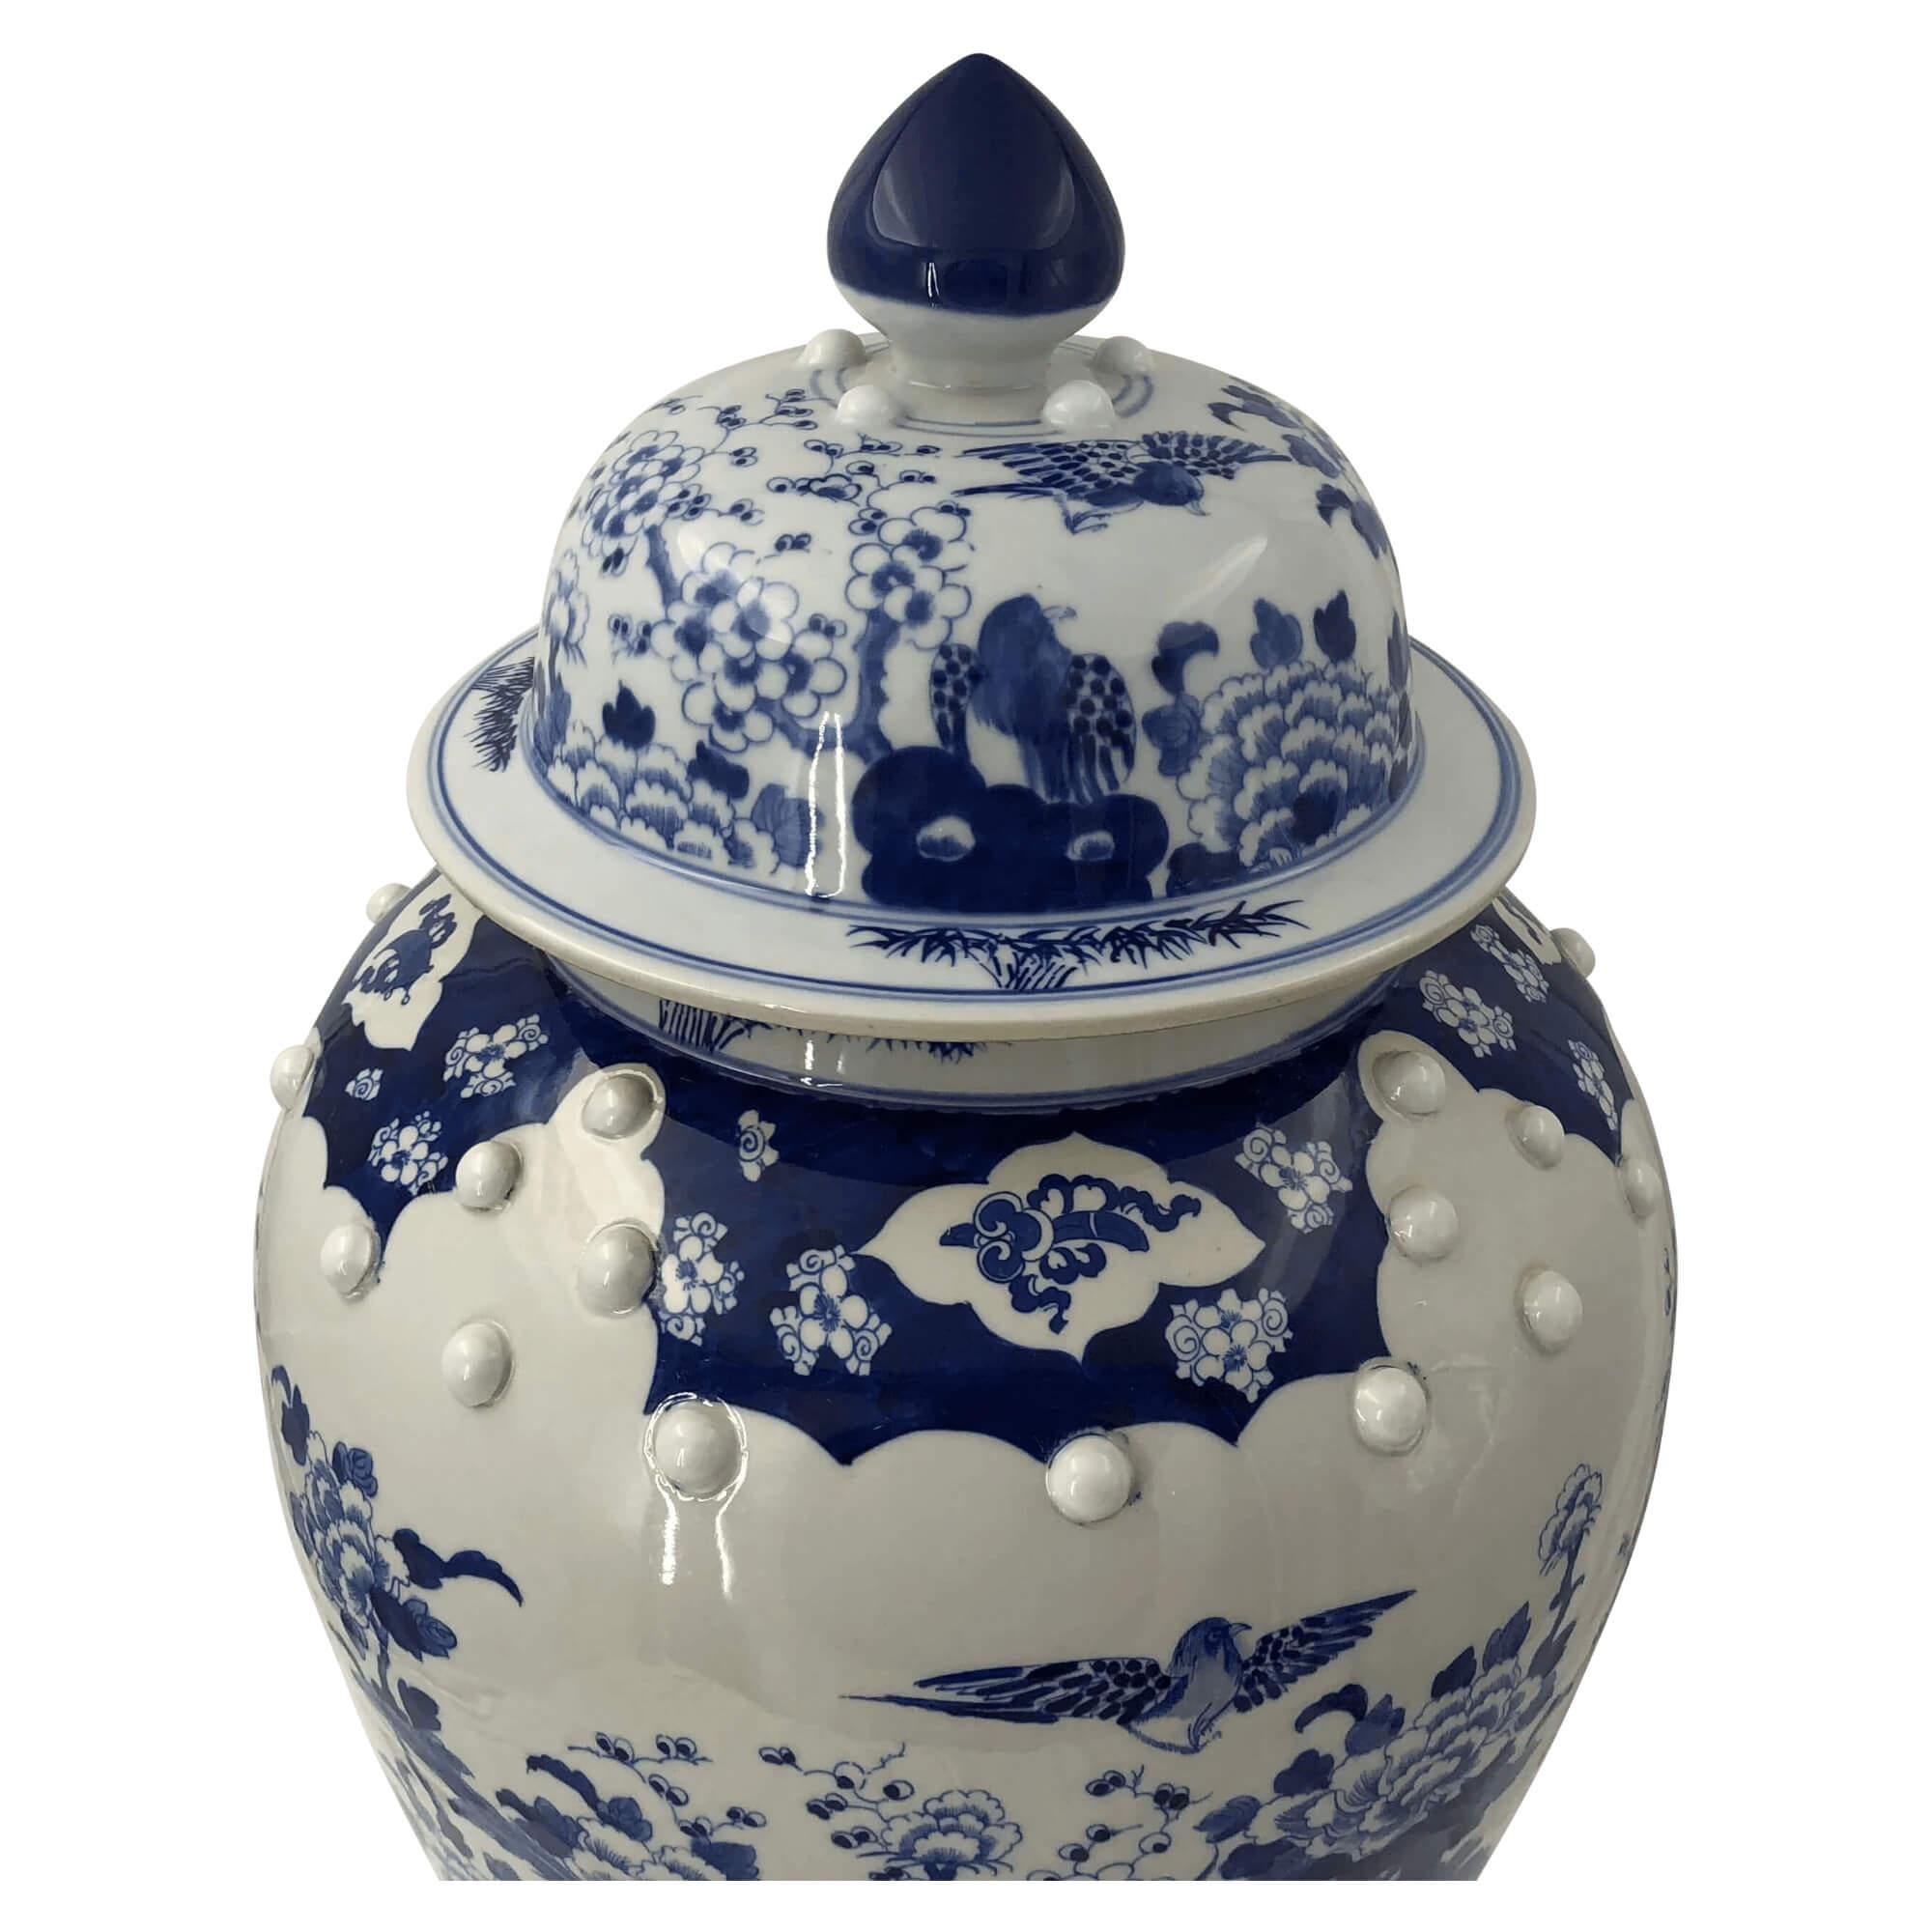 Chinese blue and white hand-painted ceramic lidded Temple jars decorated with flowers and birds.

Dimensions: 15